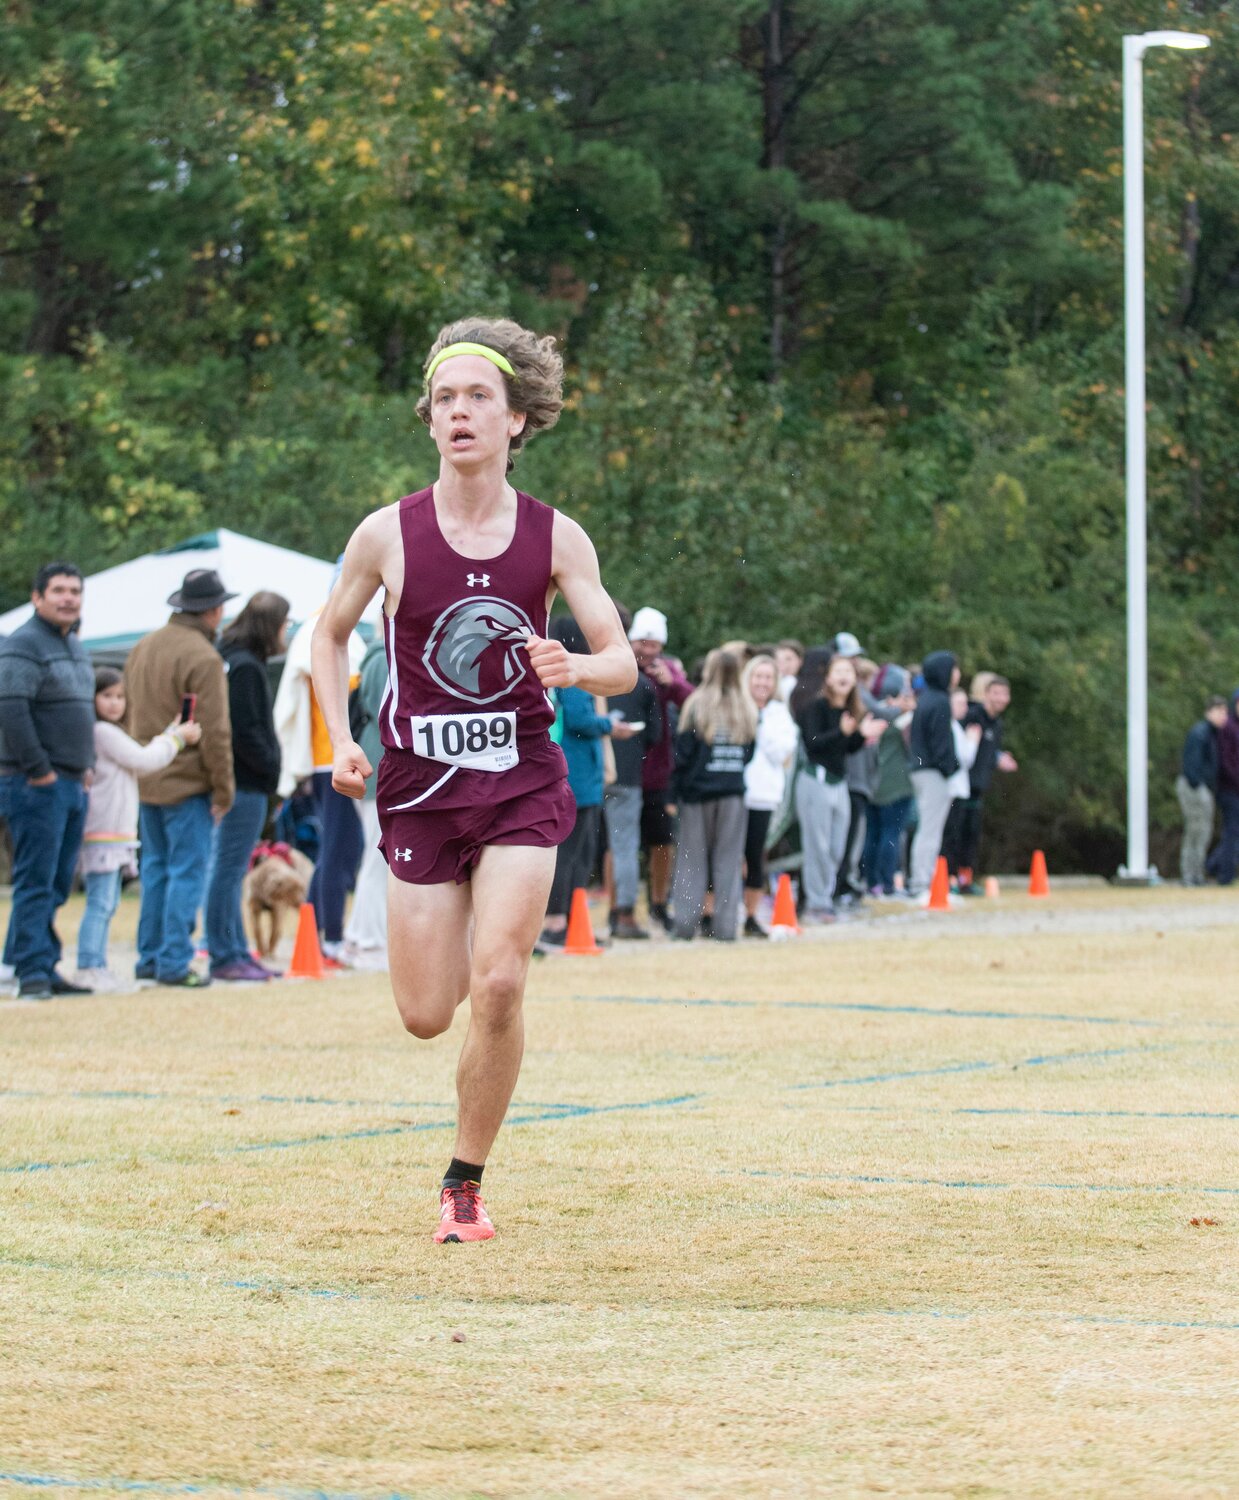 Seaforth rising junior Jack Anstrom won the 2022 2A cross country state championship race in a time of 16:15.43.